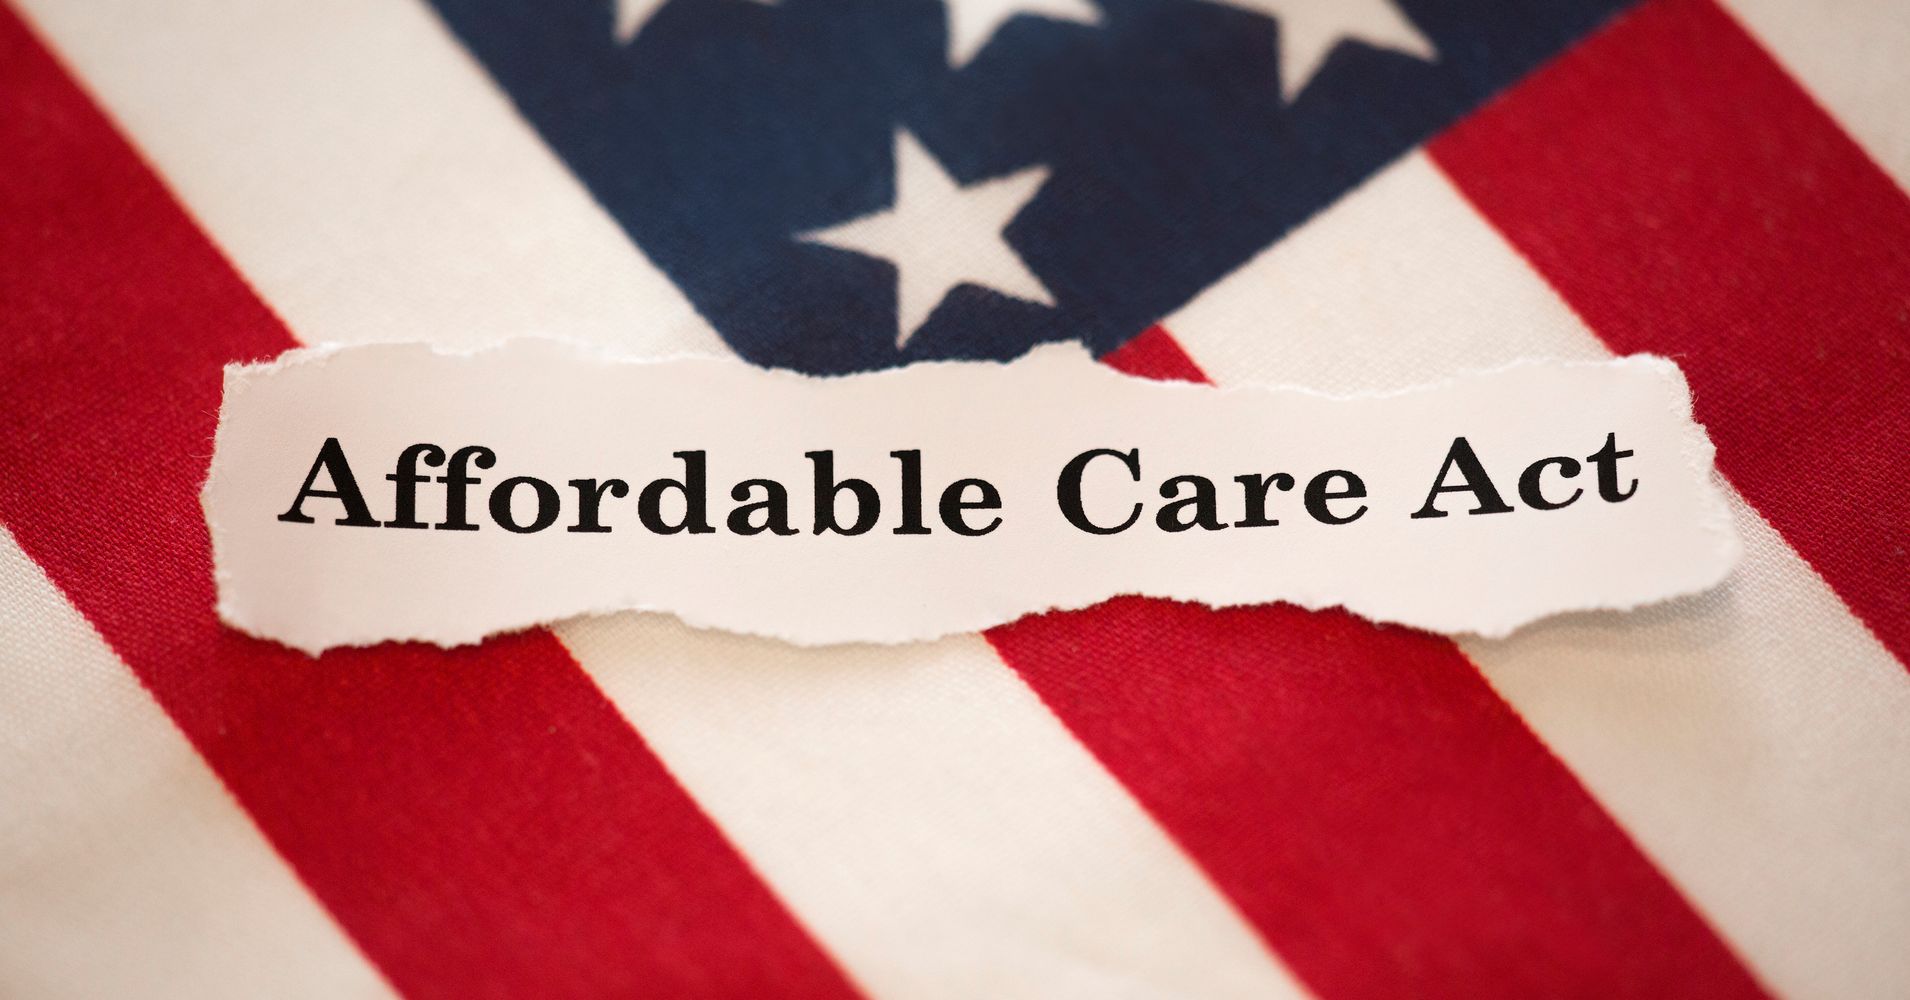 Continuing The Progress Of The Affordable Care Act Guiding Principles To Ensure ValueBased